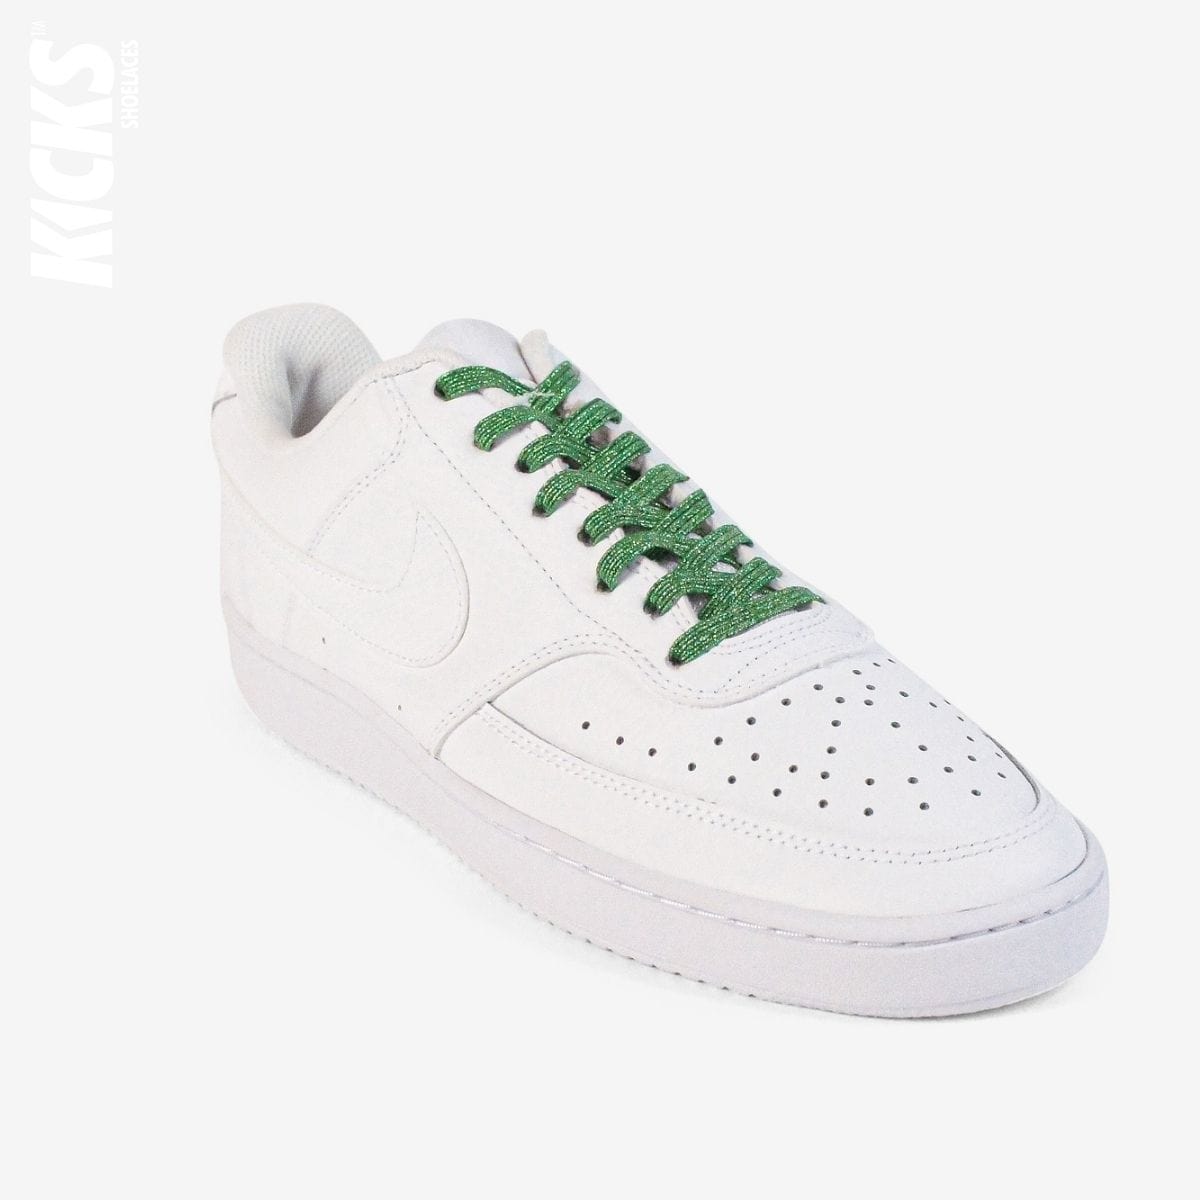 elastic-no-tie-shoelaces-with-green-laces-on-nike-white-sneakers